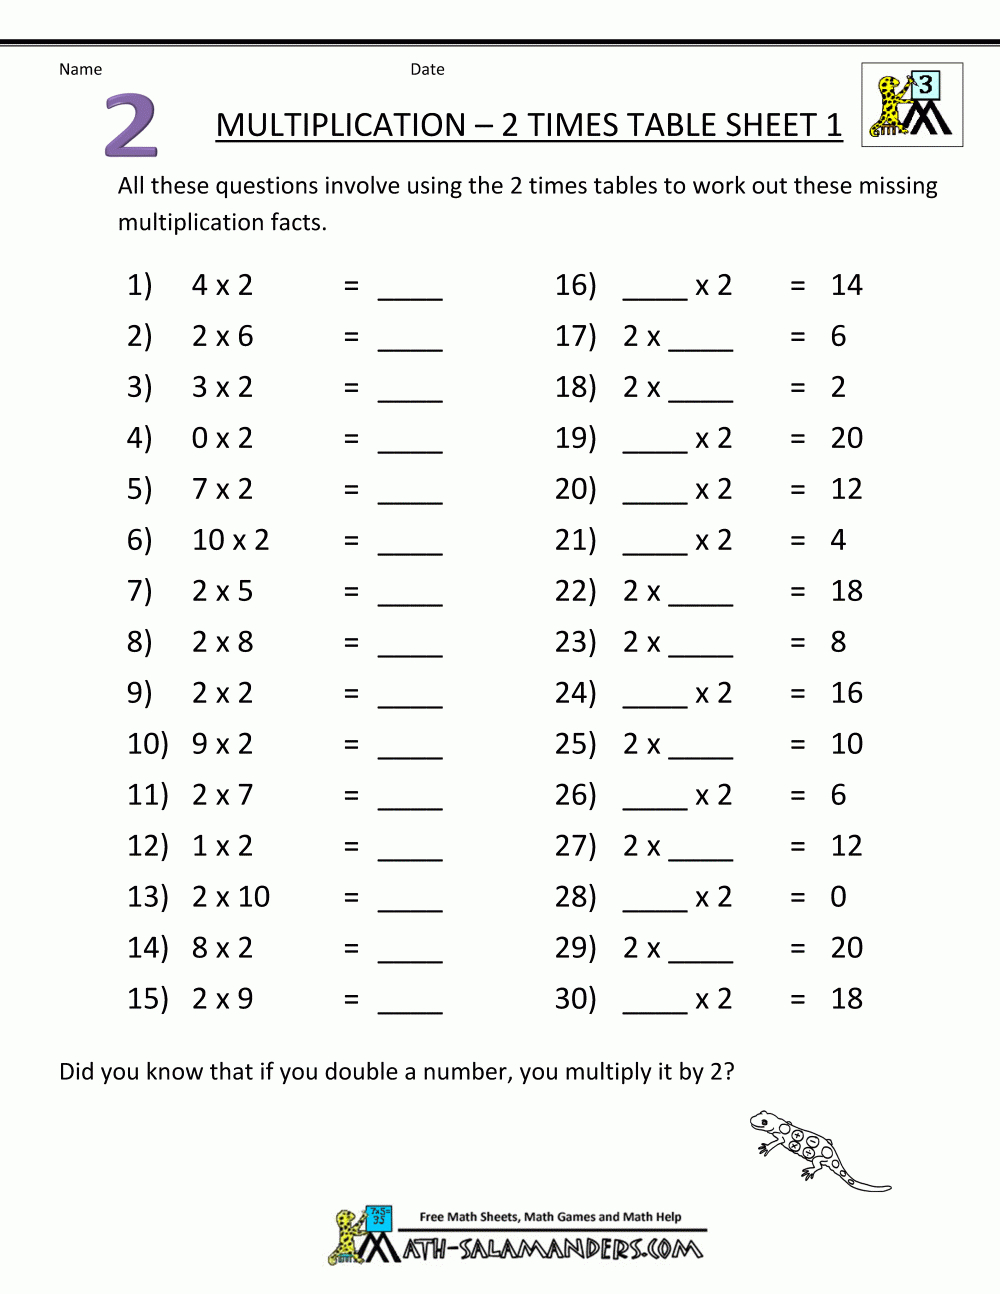 Multiplication Drill Sheets 2 Times Table 1 intended for Free Printable Multiplication Drill Sheets